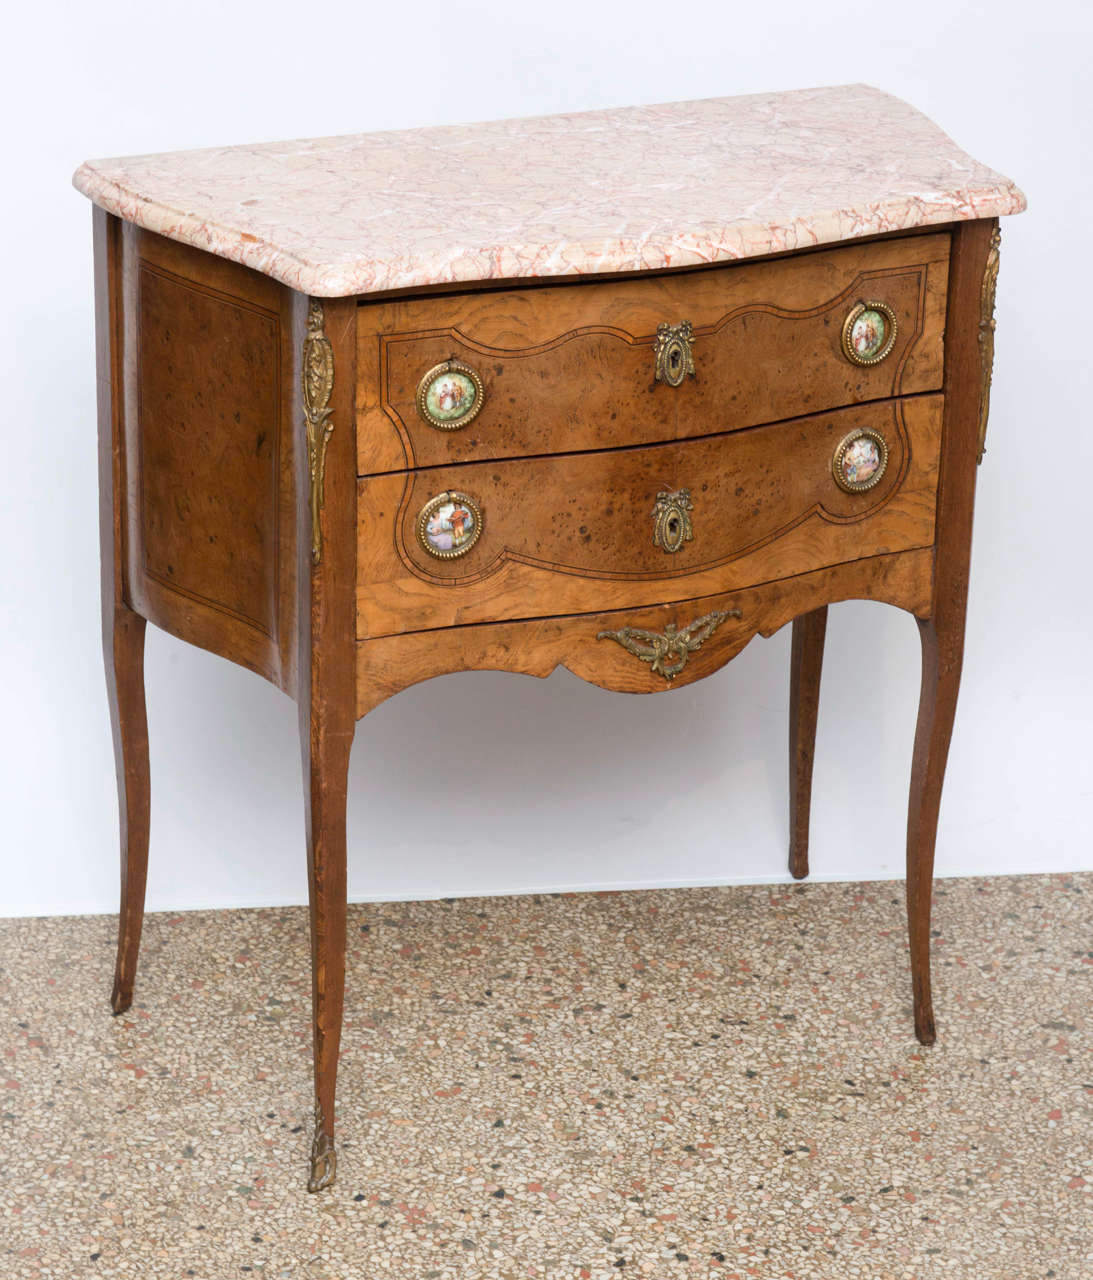 Finely crafted commode made of satinwood with inlays, ormolu mounted. Porcelain circular plaques are incorporated into the drawer pulls. Removable, shaped marble-top. Original restored finish.

Originally $ 2,500.00

PLEASE VISIT OUR SITE FOR